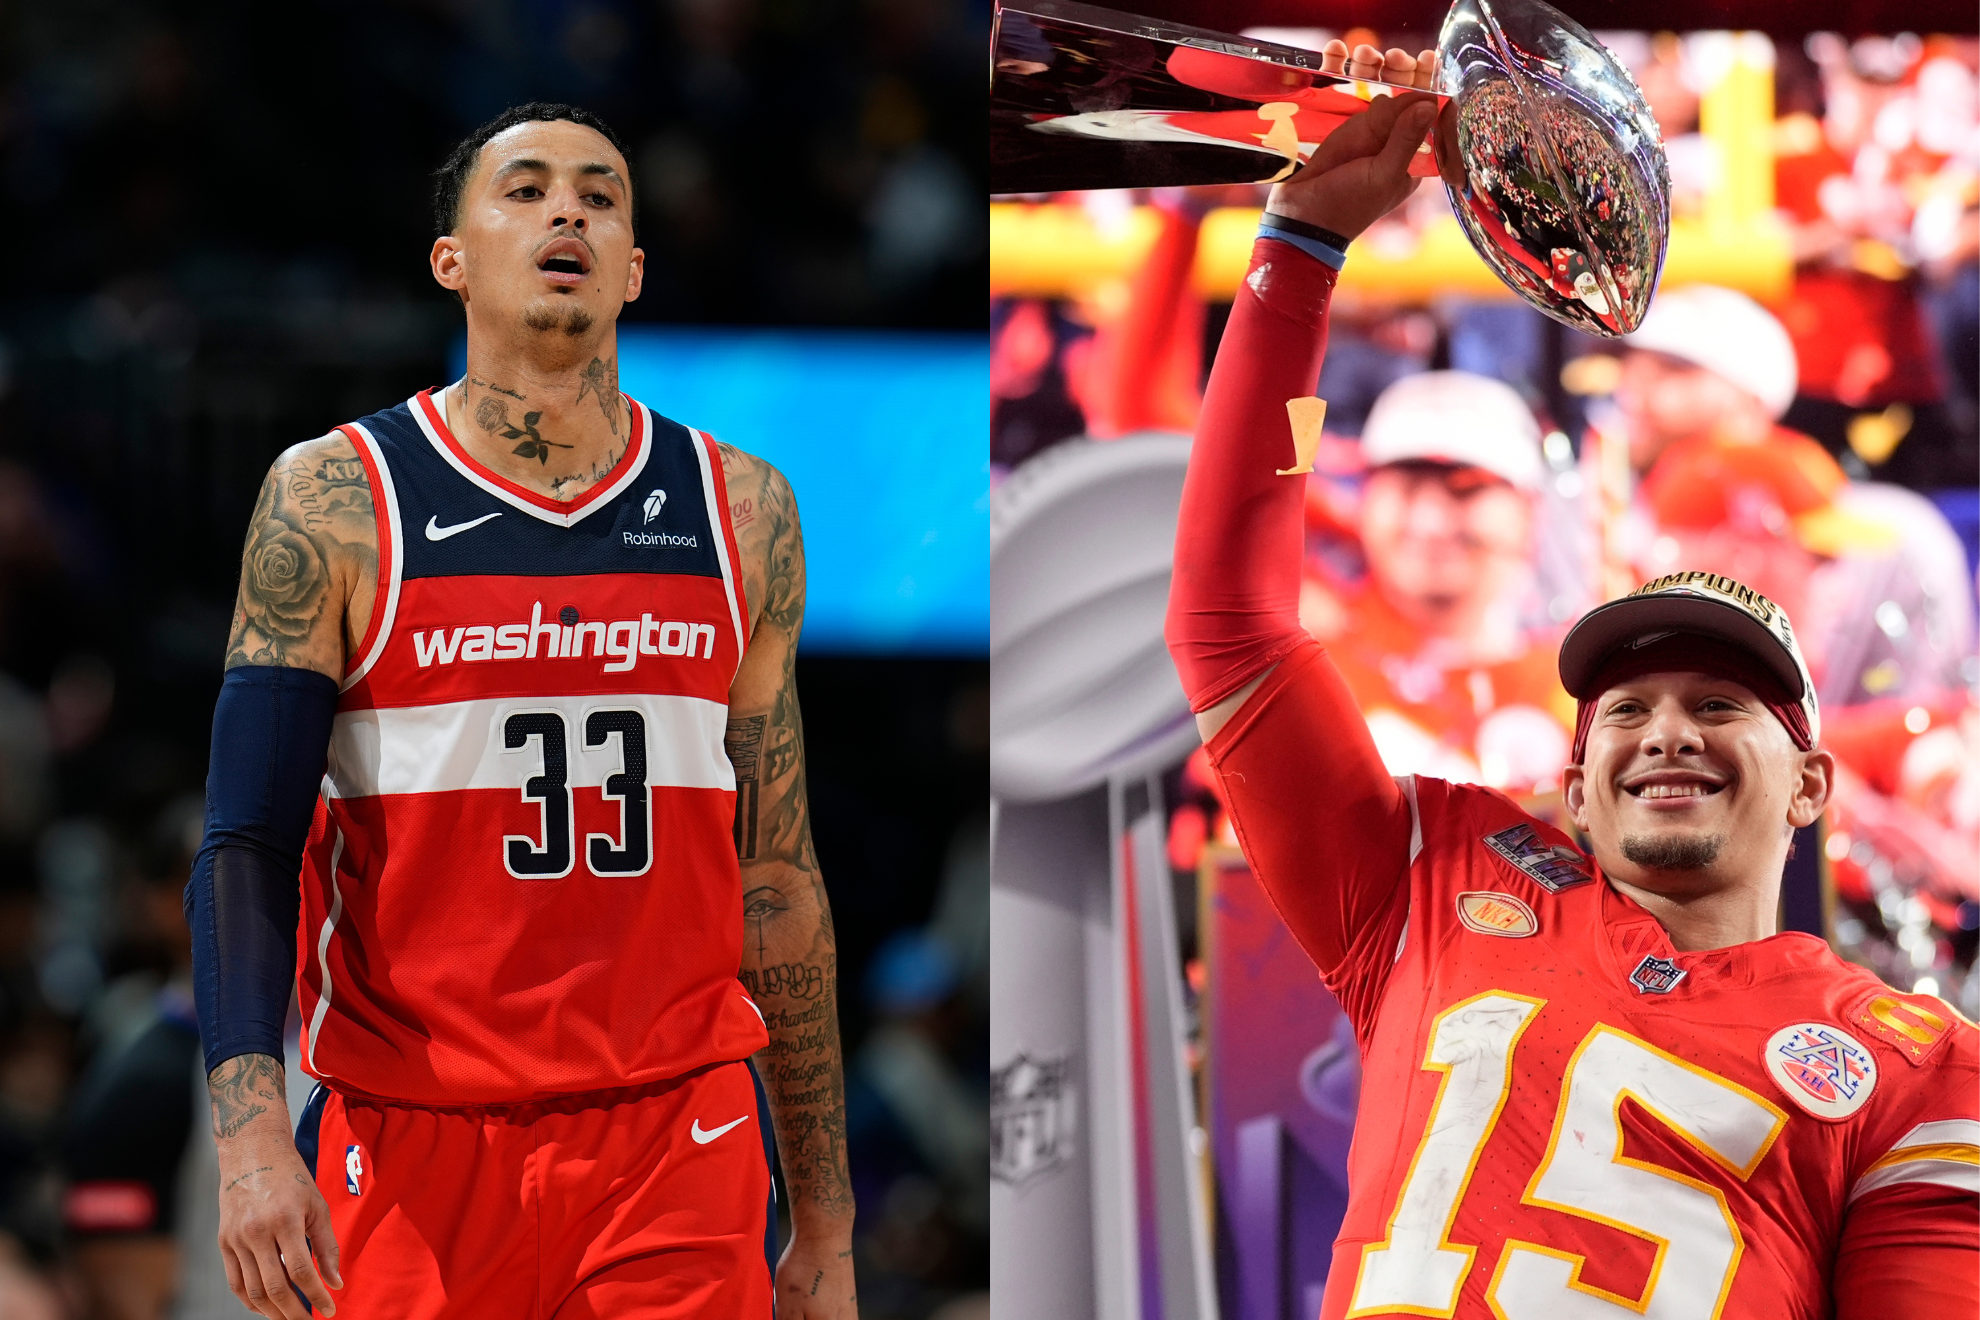 The Chiefs have reached the NFLs summit; the Wizards have a long way to go to trouble the NBAs elite.